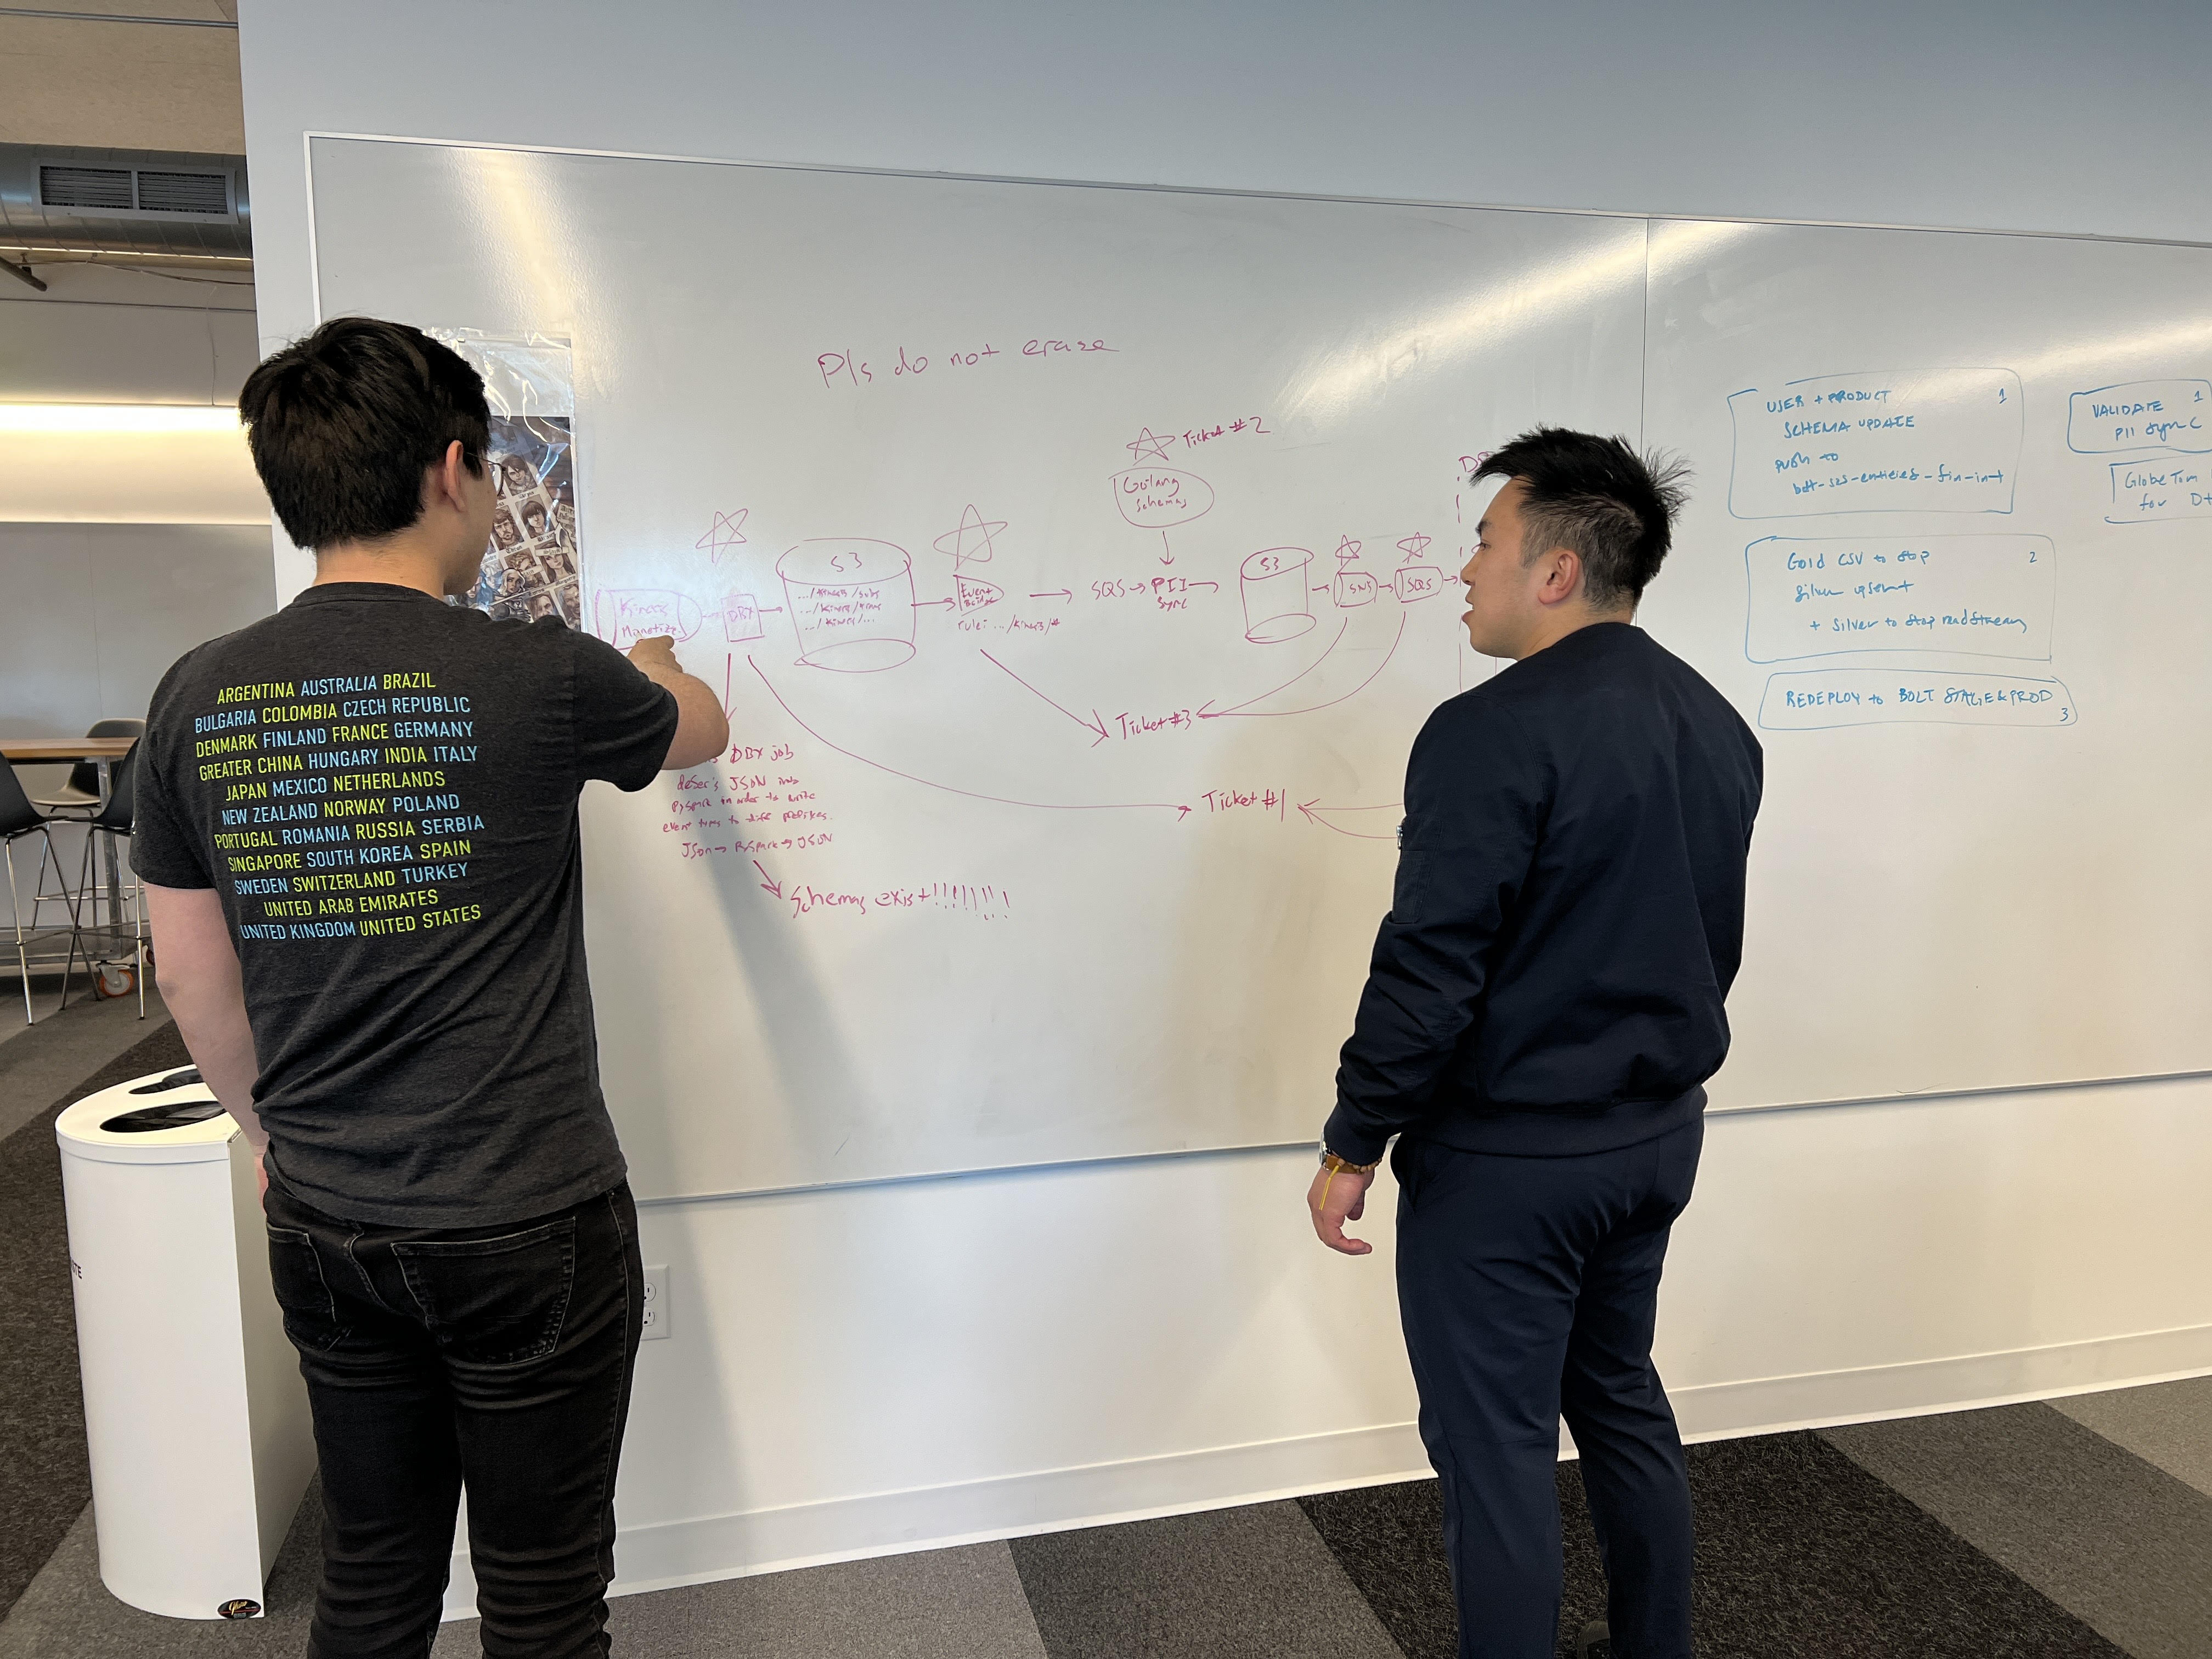 Photo of Daniel pointing to whiteboard while talking to colleague